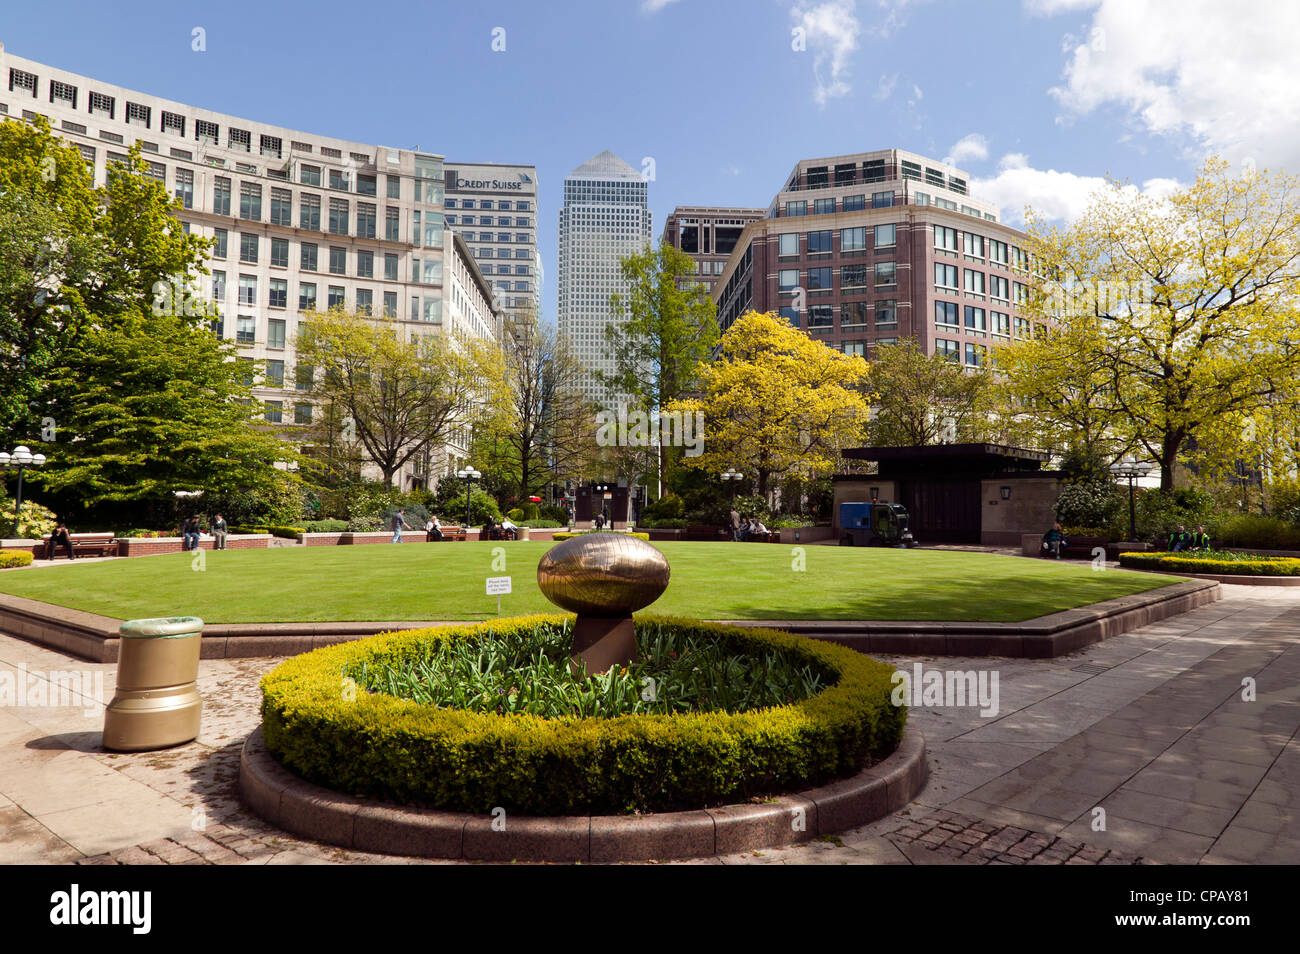 A view of Westferry Circus, looking towards One Canda Place, Canary Wharf Business District, London. Stock Photo